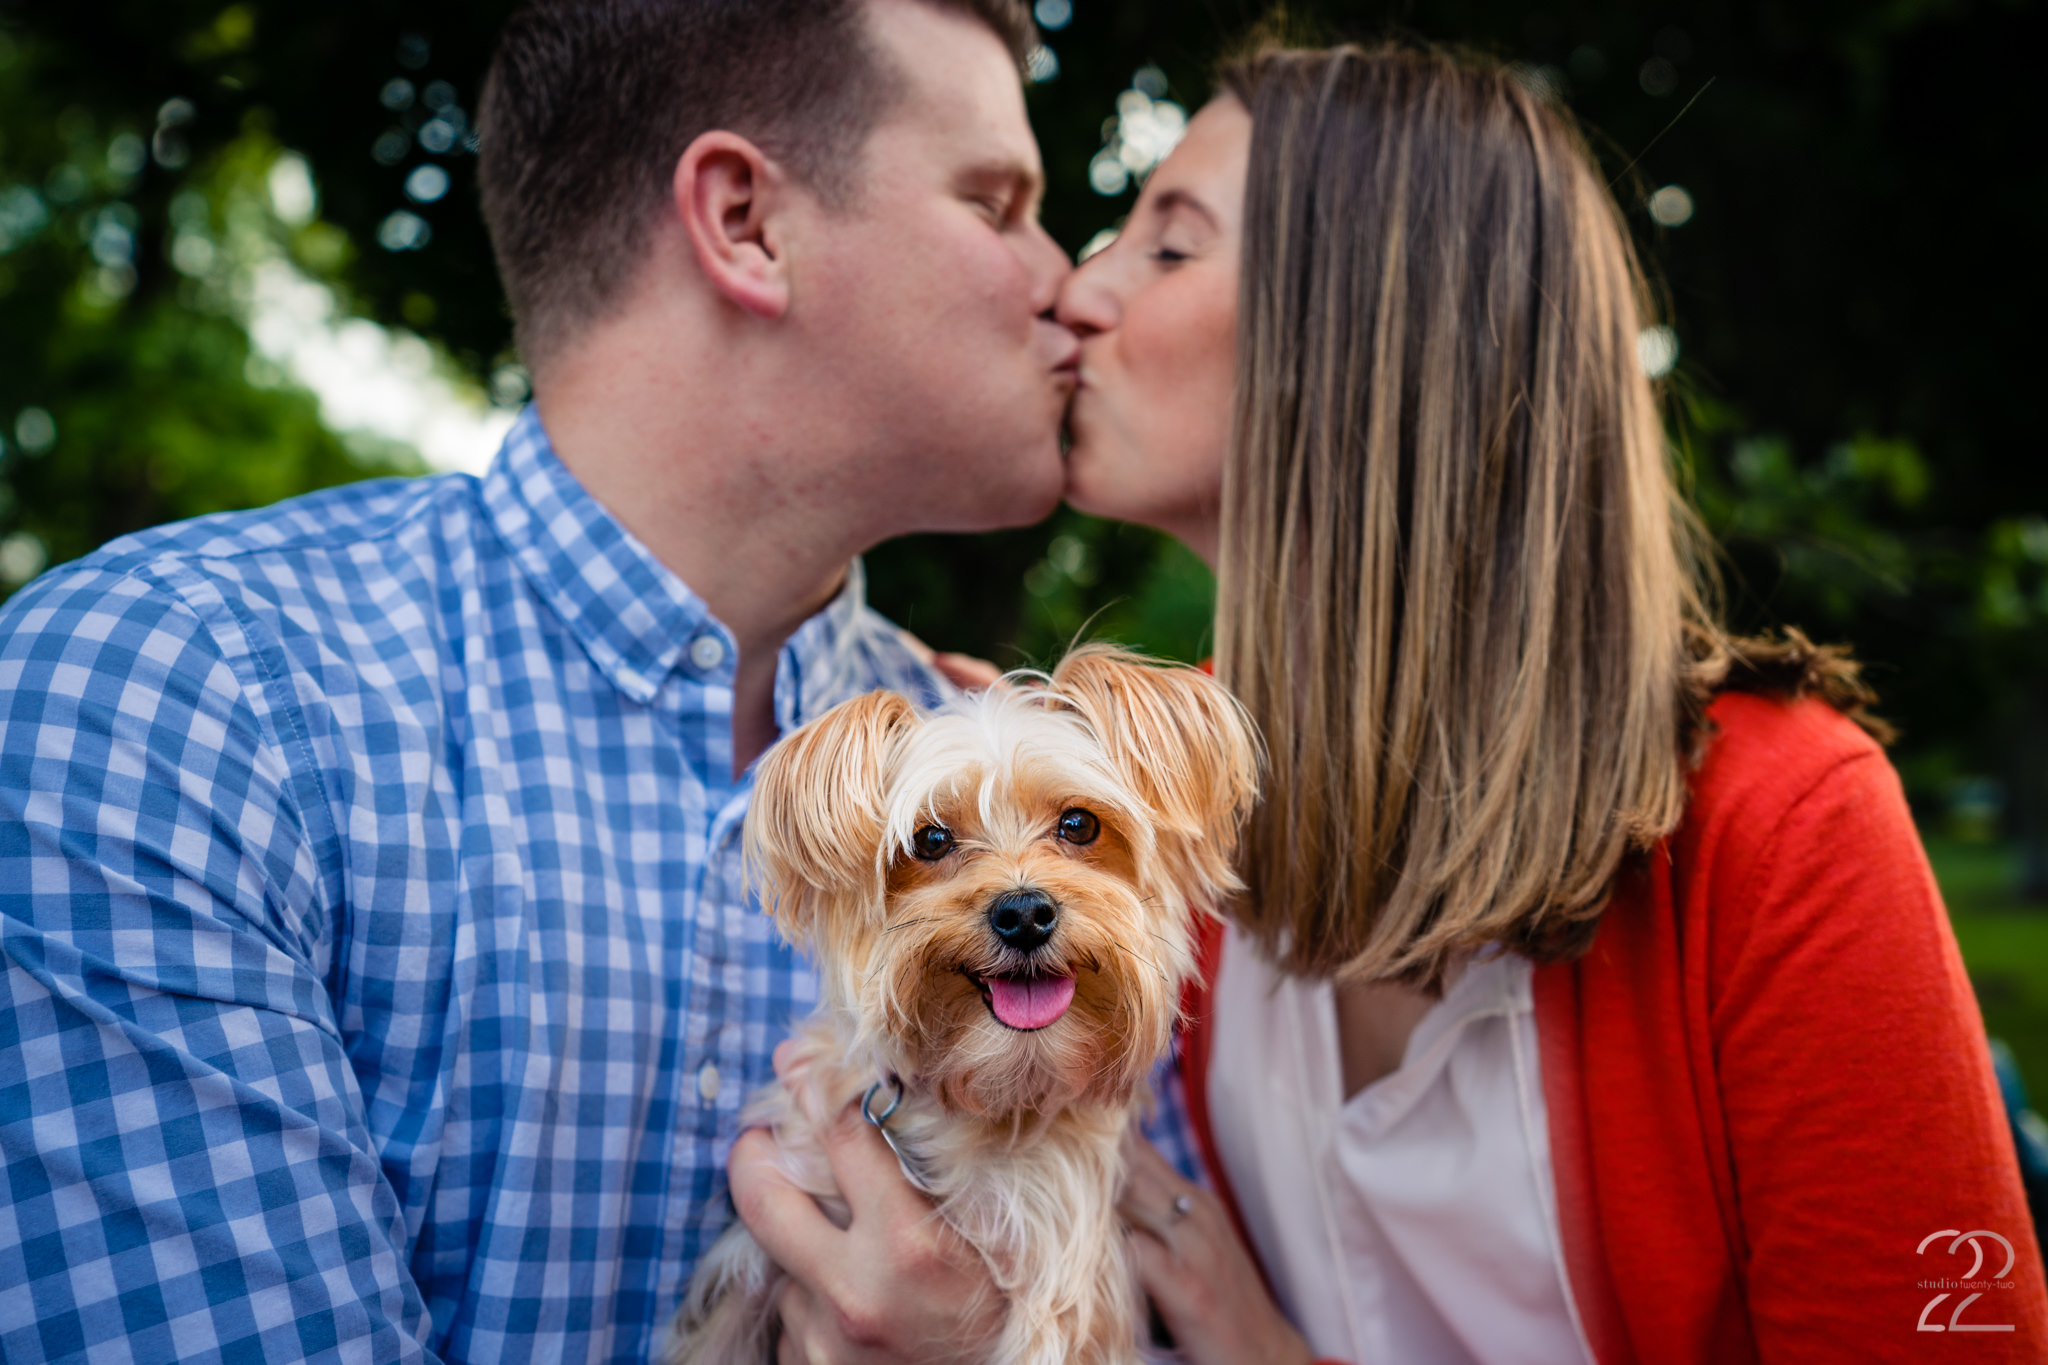  We had so much fun shooting these engagement photos in Columbus at Schiller Park. Taylor and Kristen’s dog Millie just added a cherry on top! 